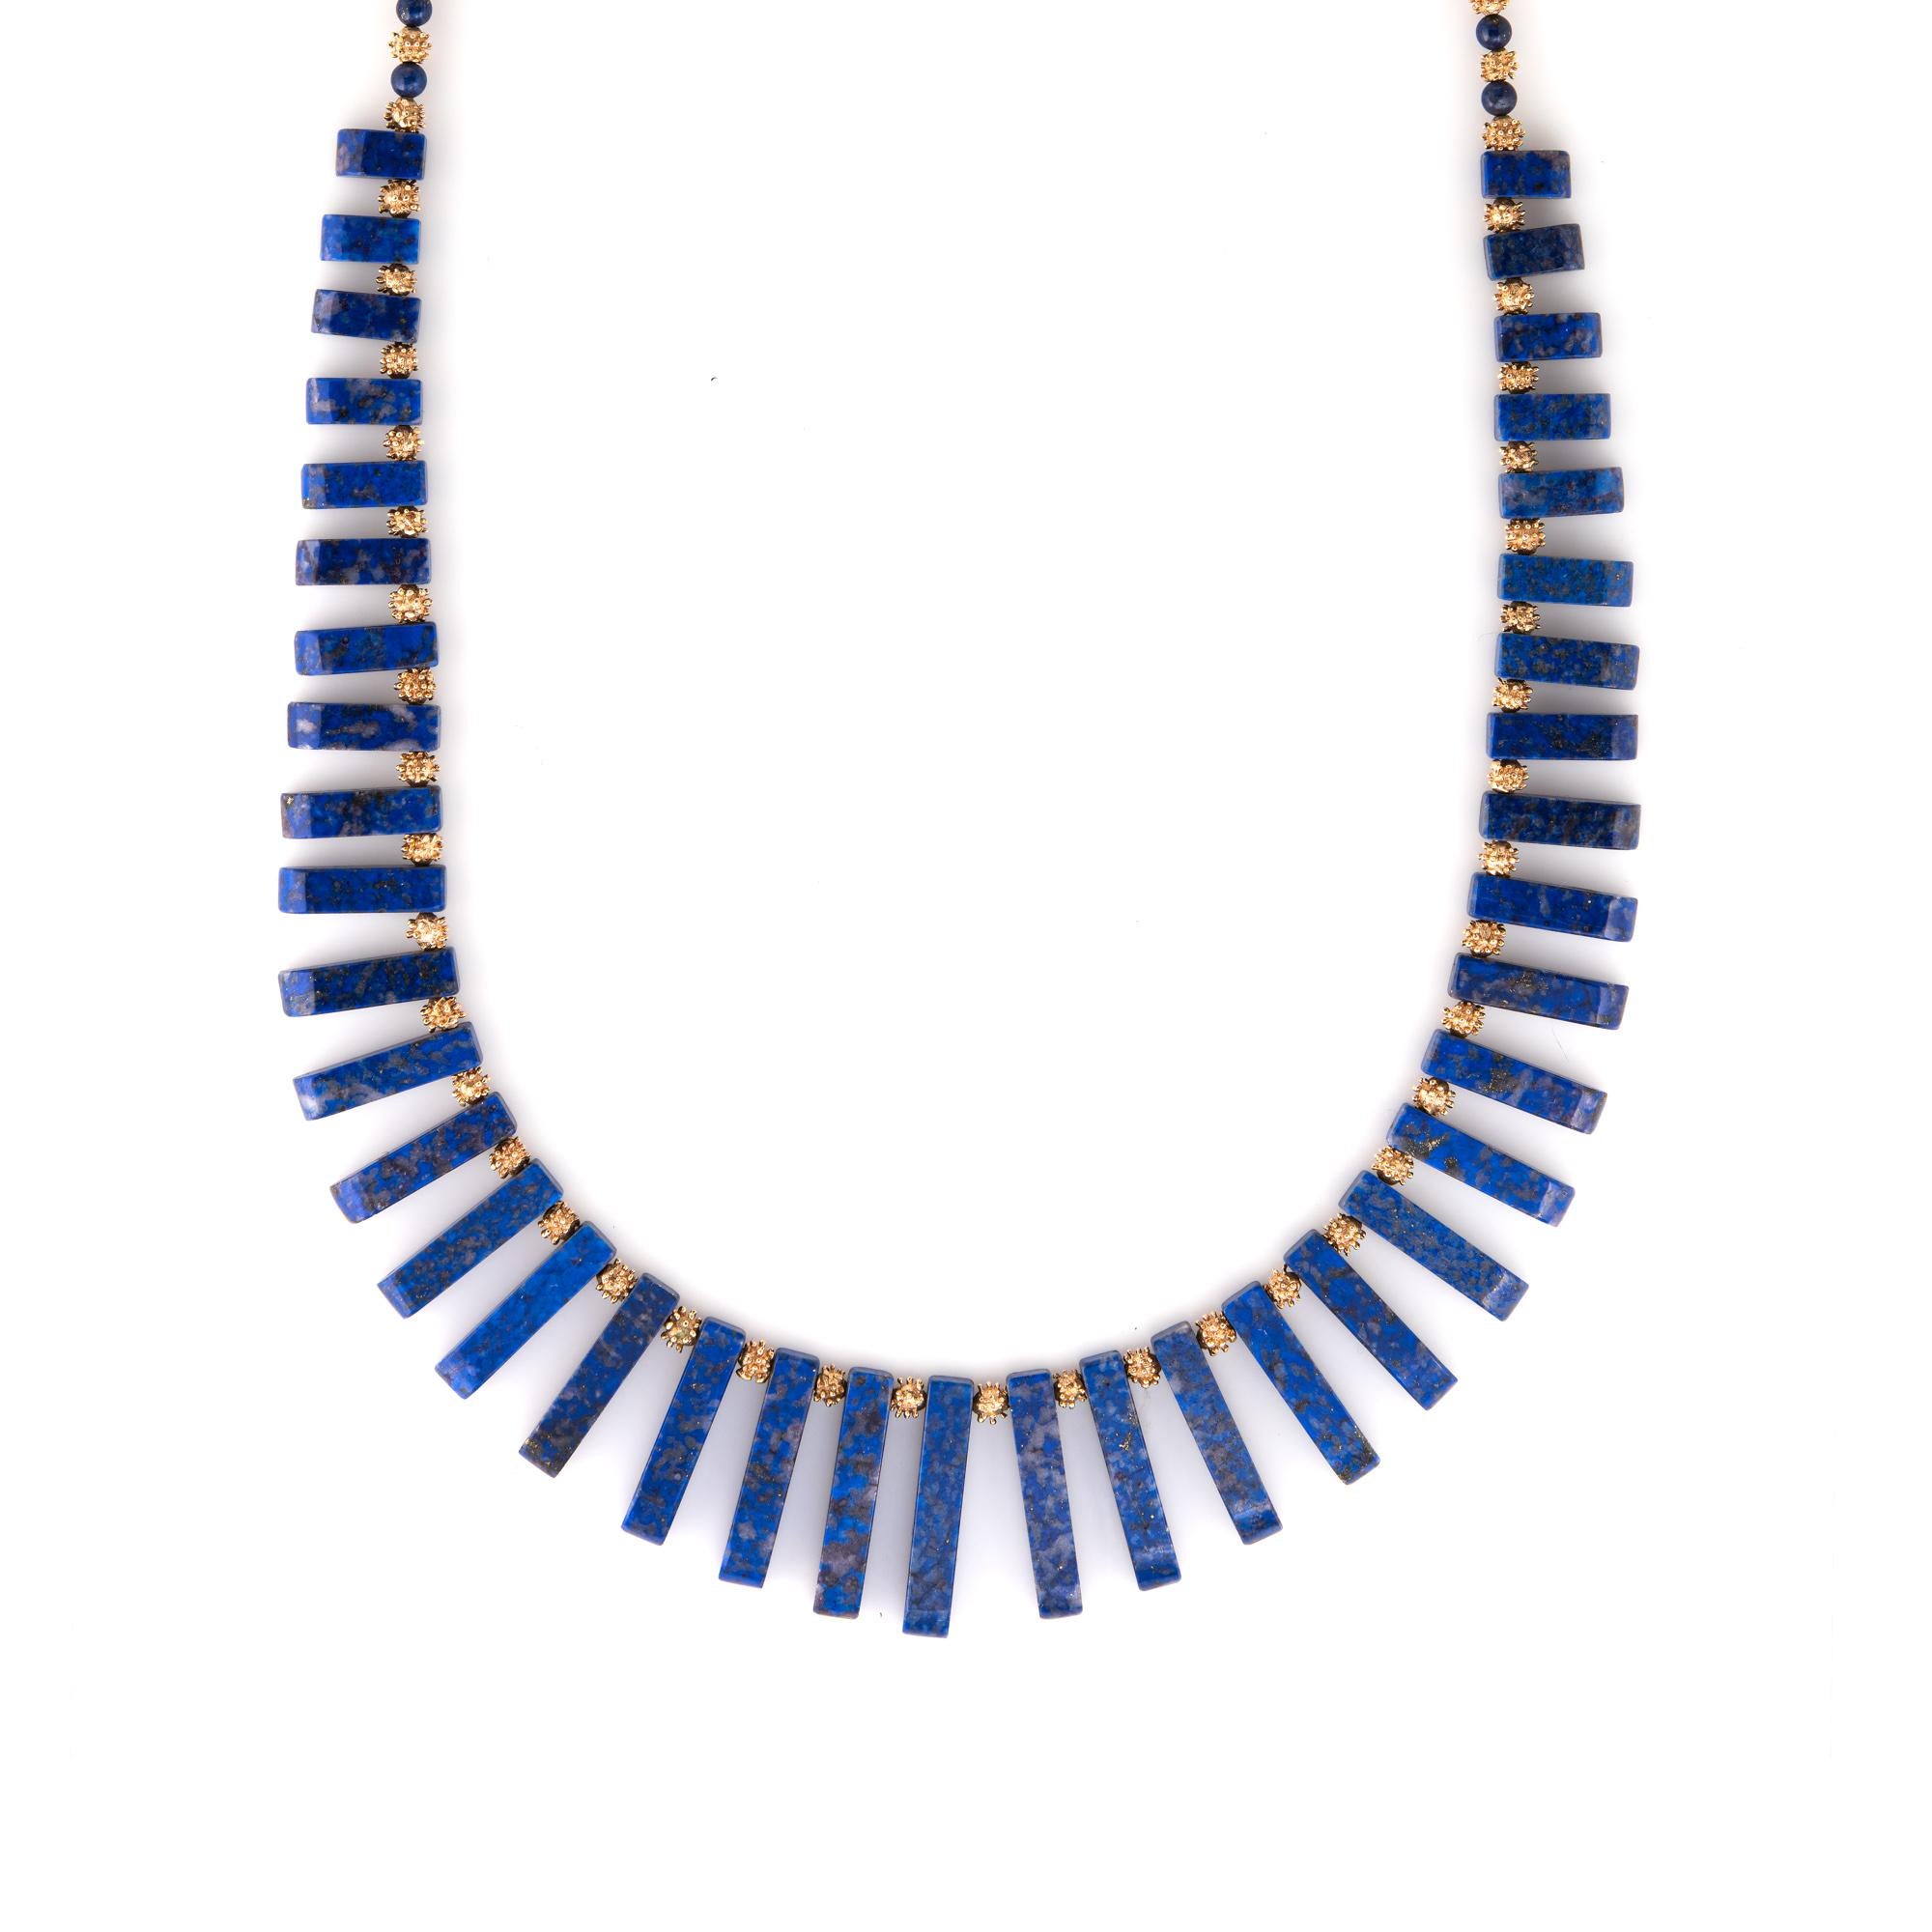 Finely detailed vintage lapis lazuli fringe necklace crafted in 14 karat yellow gold. 

Lapis lazuli tendrils graduate in size from 10mm to 28mm along with 4mm lapis lazuli beads. The stones are in excellent condition and free of cracks or